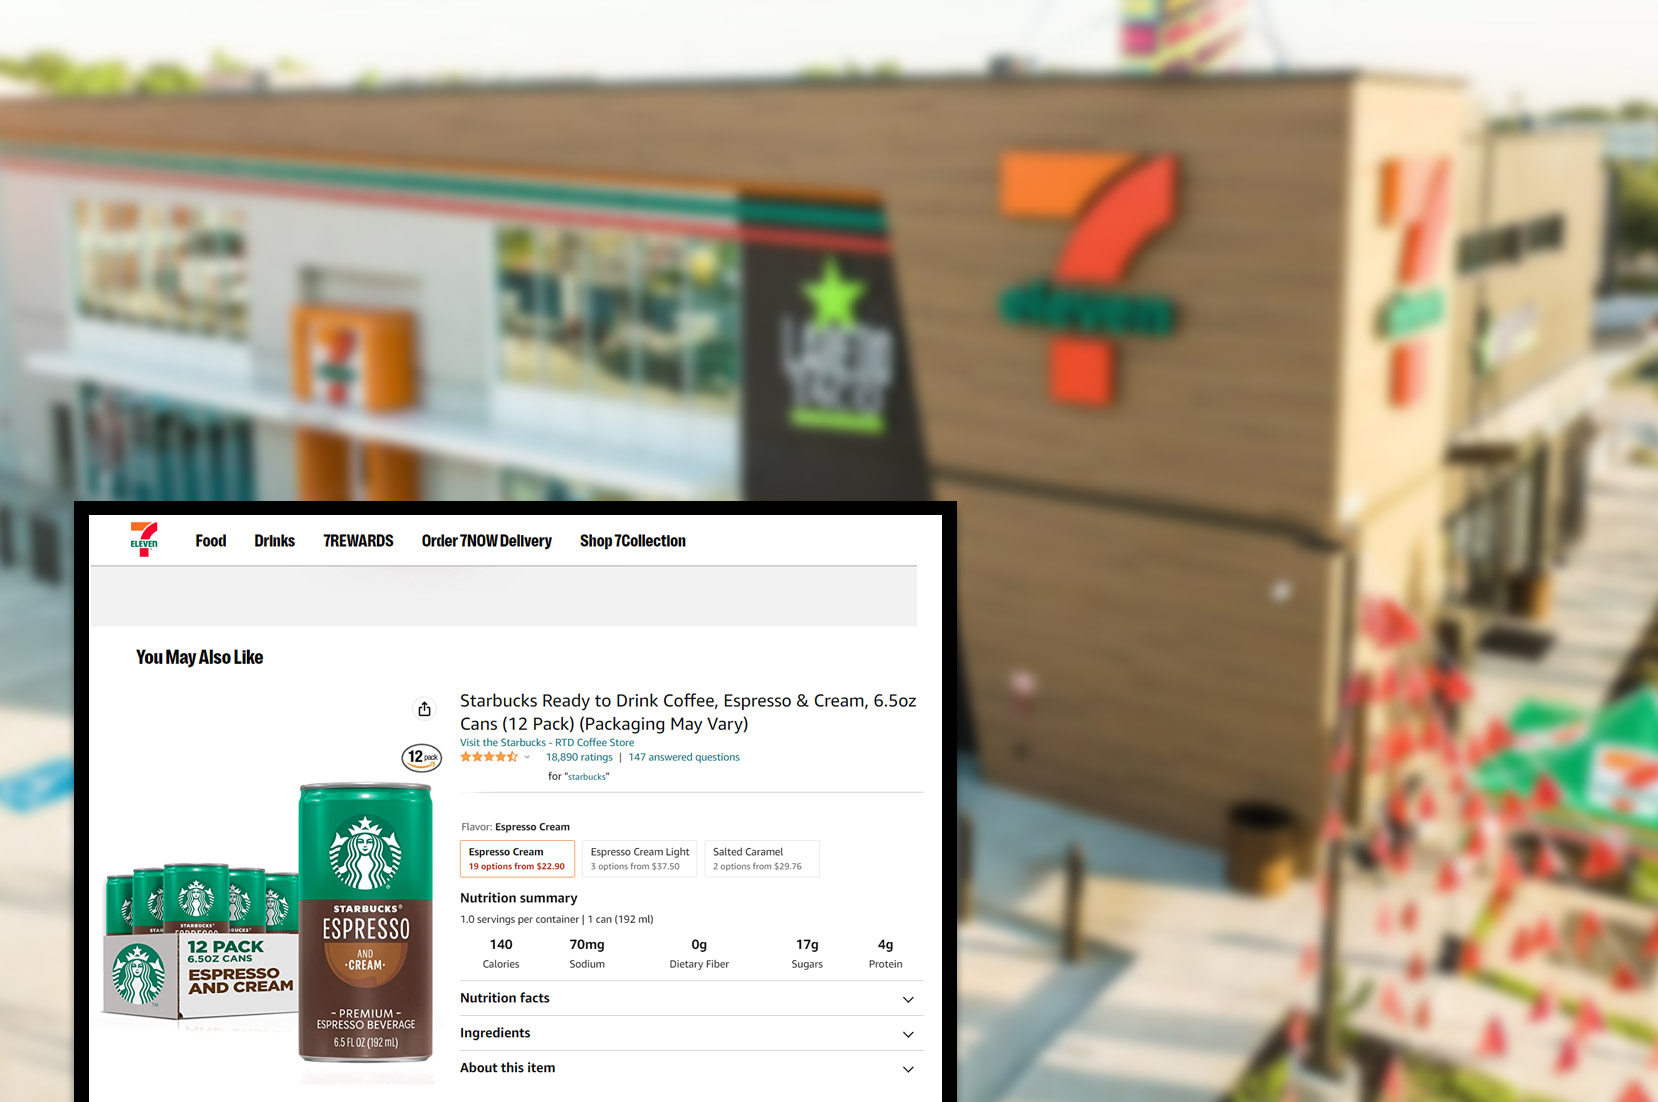 7-eleven-comproduct-pricing-information-and-image-scraping-services